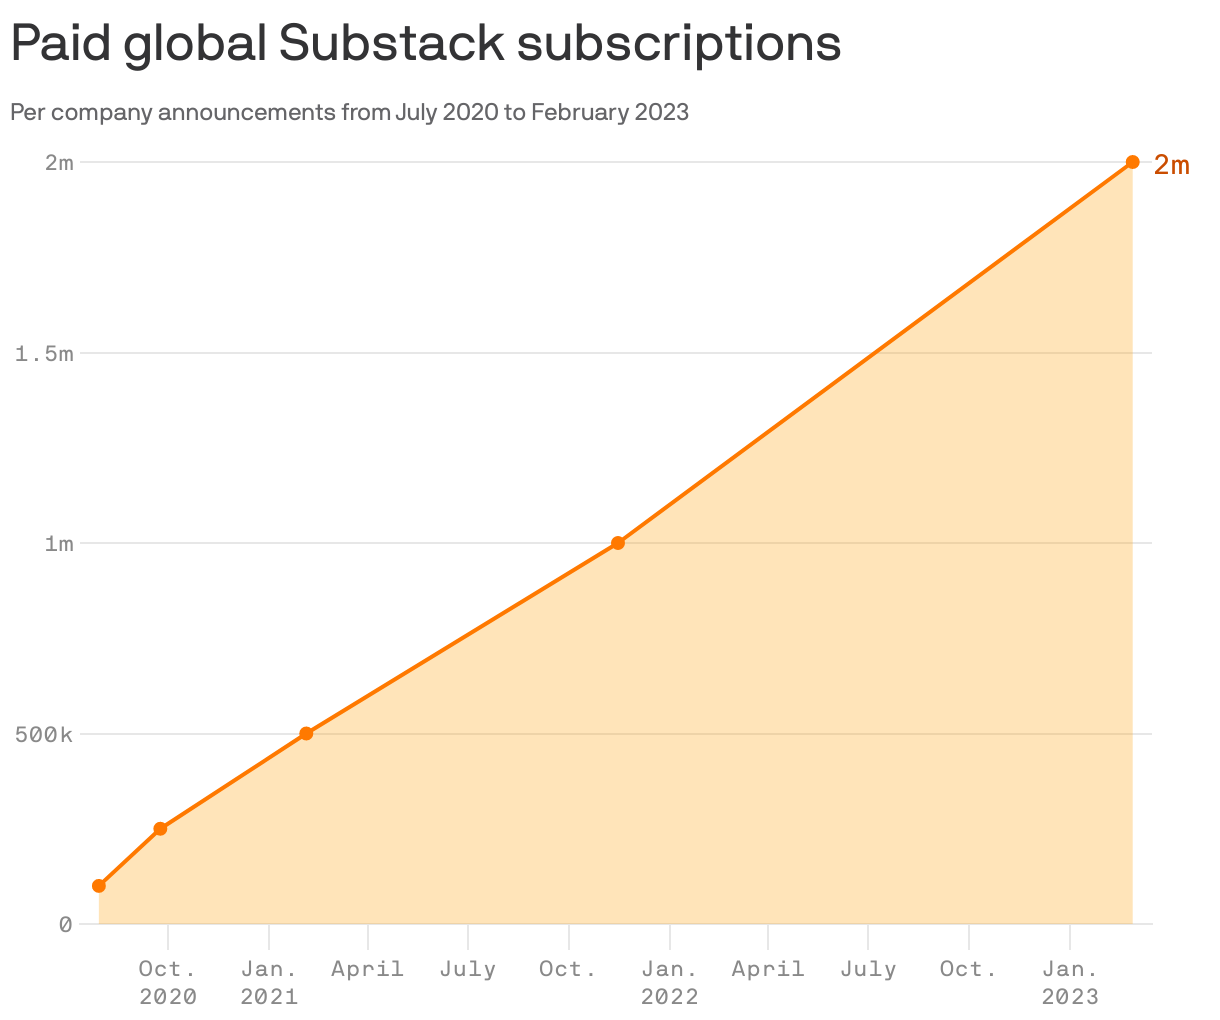 Paid global Substack subscriptions